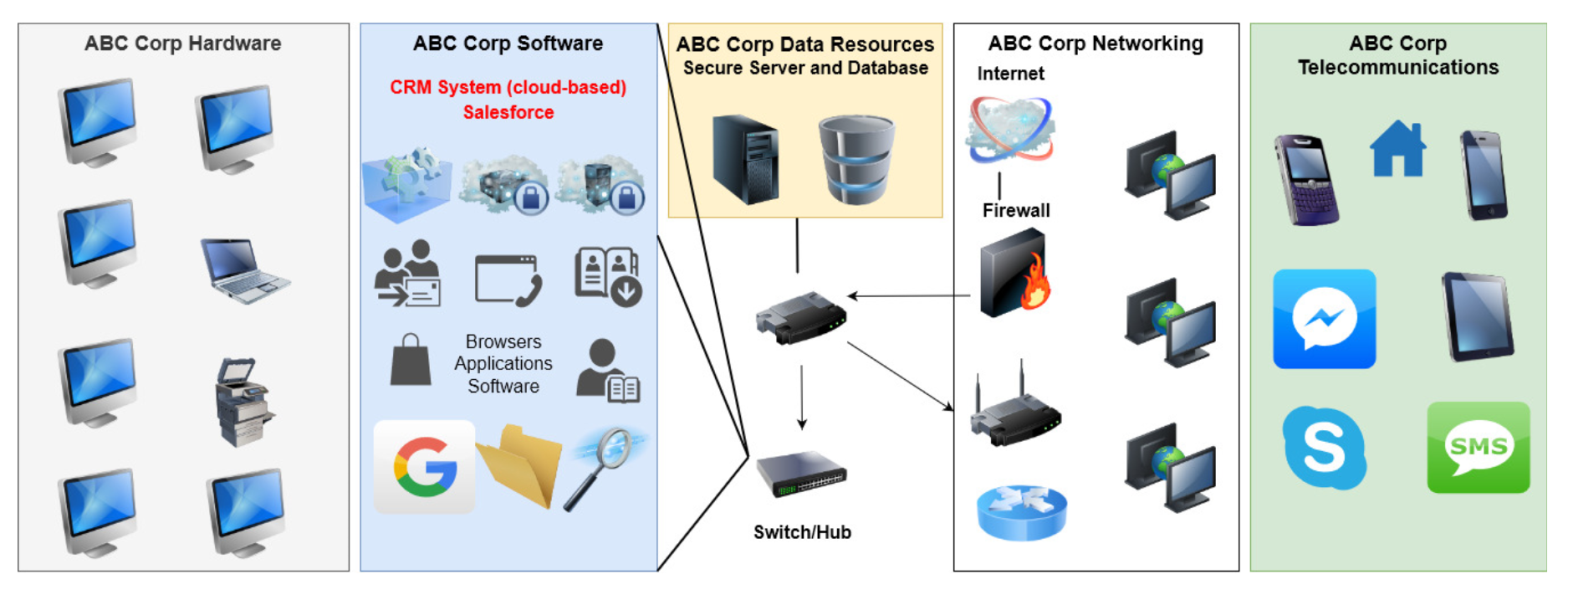 ABC Corp IT components.